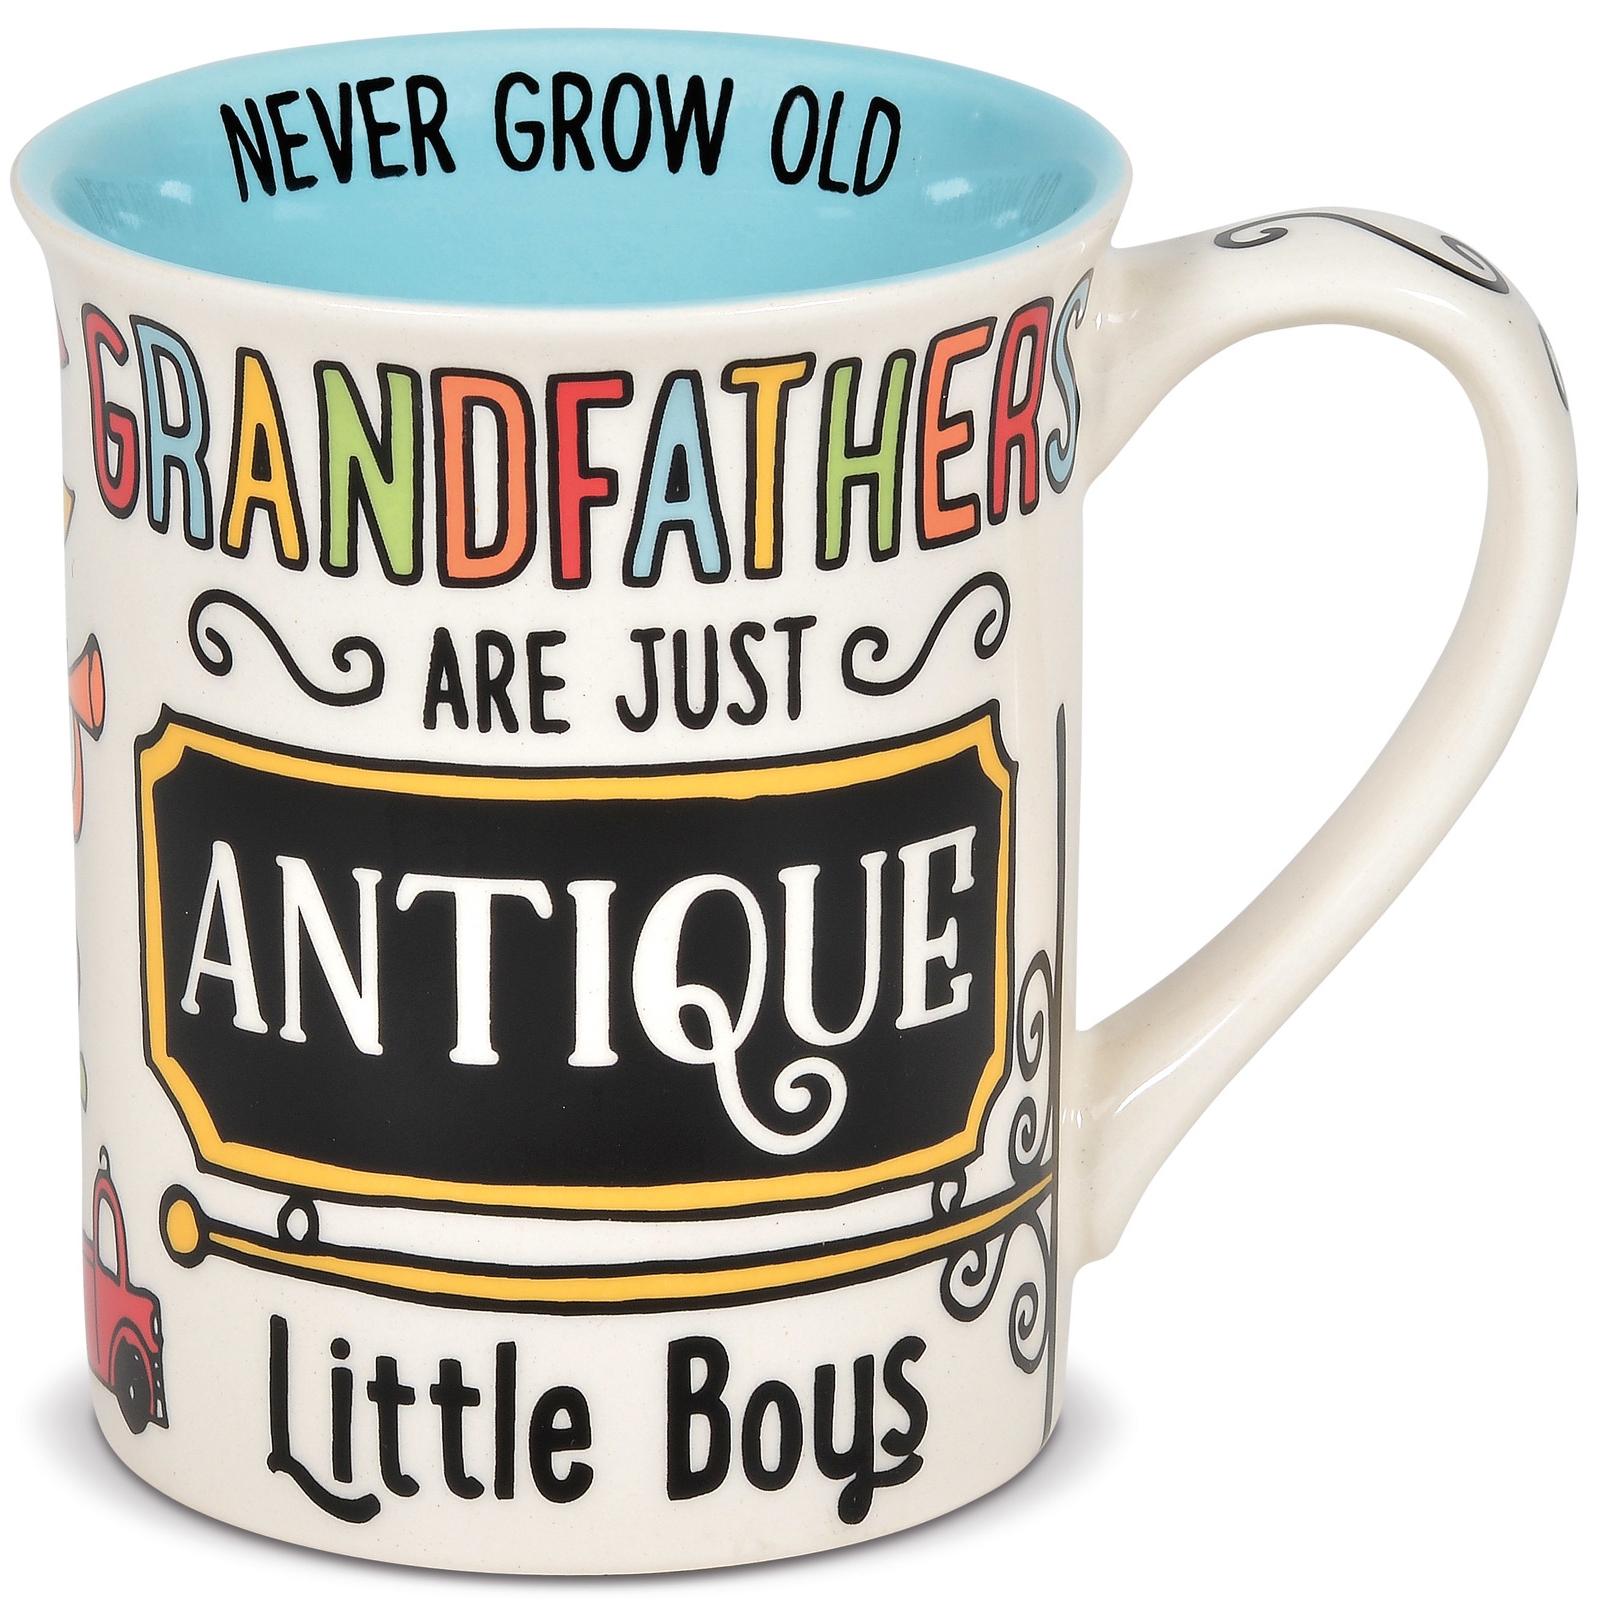 Our Name Is Mud 6006405 Grandfathers Antique Mug